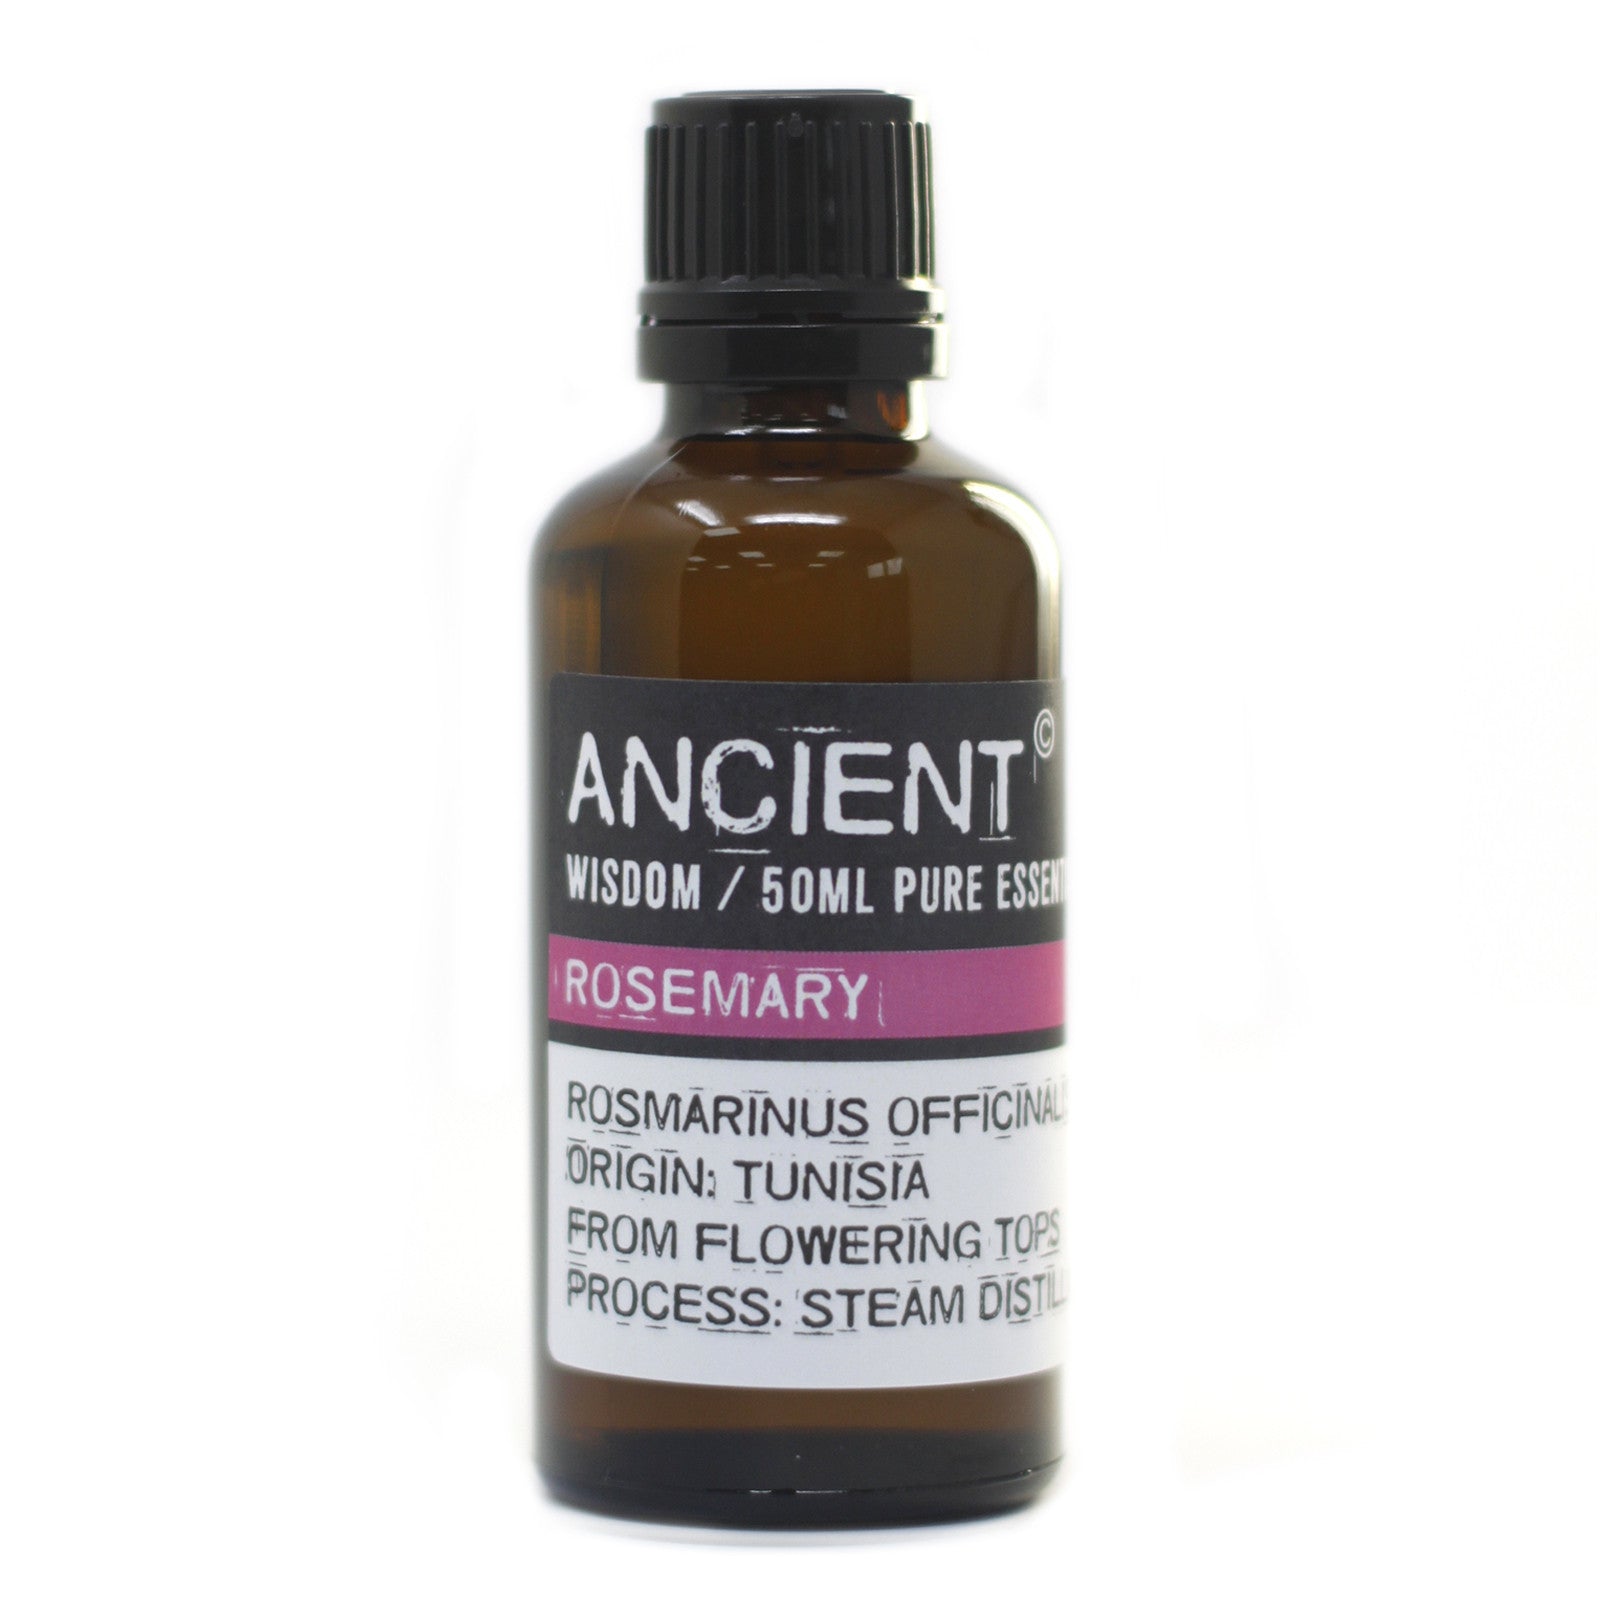 View Rosemary 50ml information